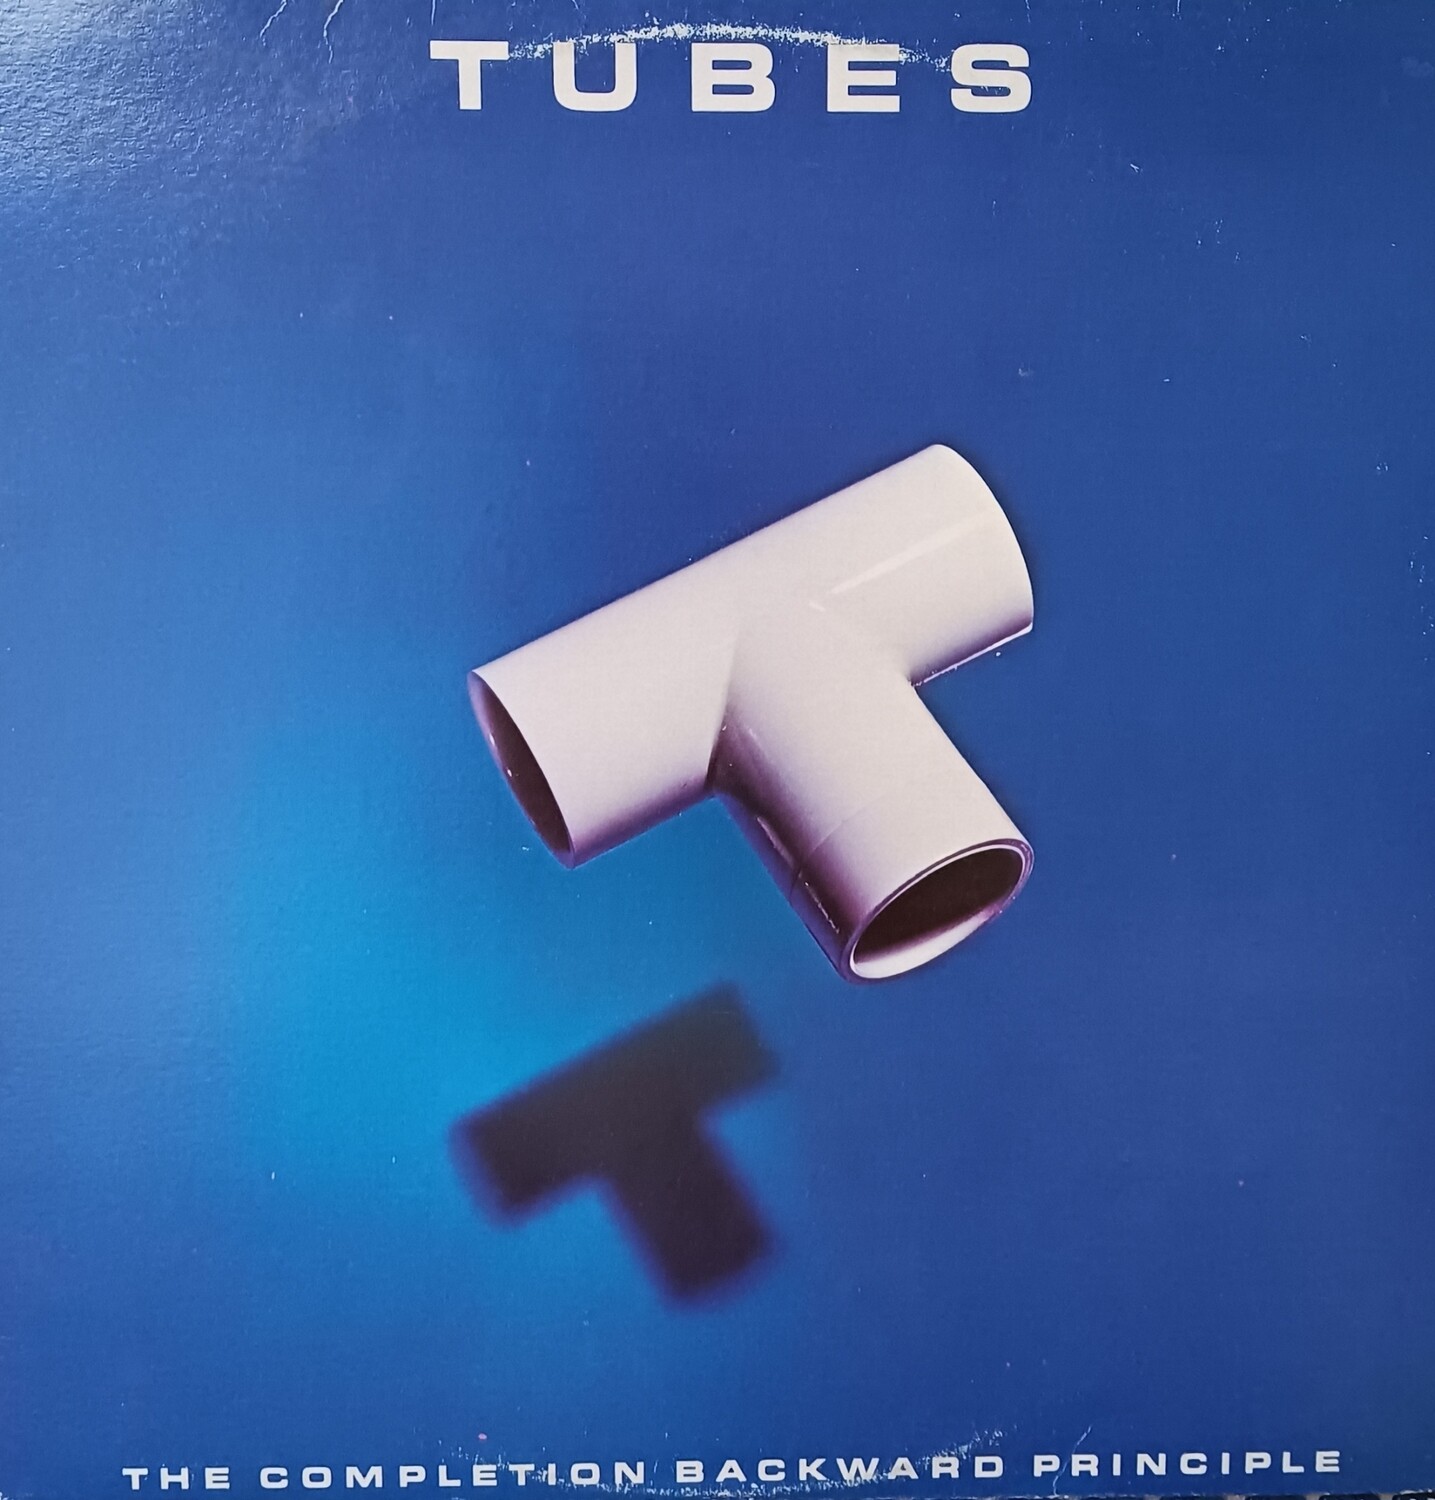 The Tubes - The completion backward principle